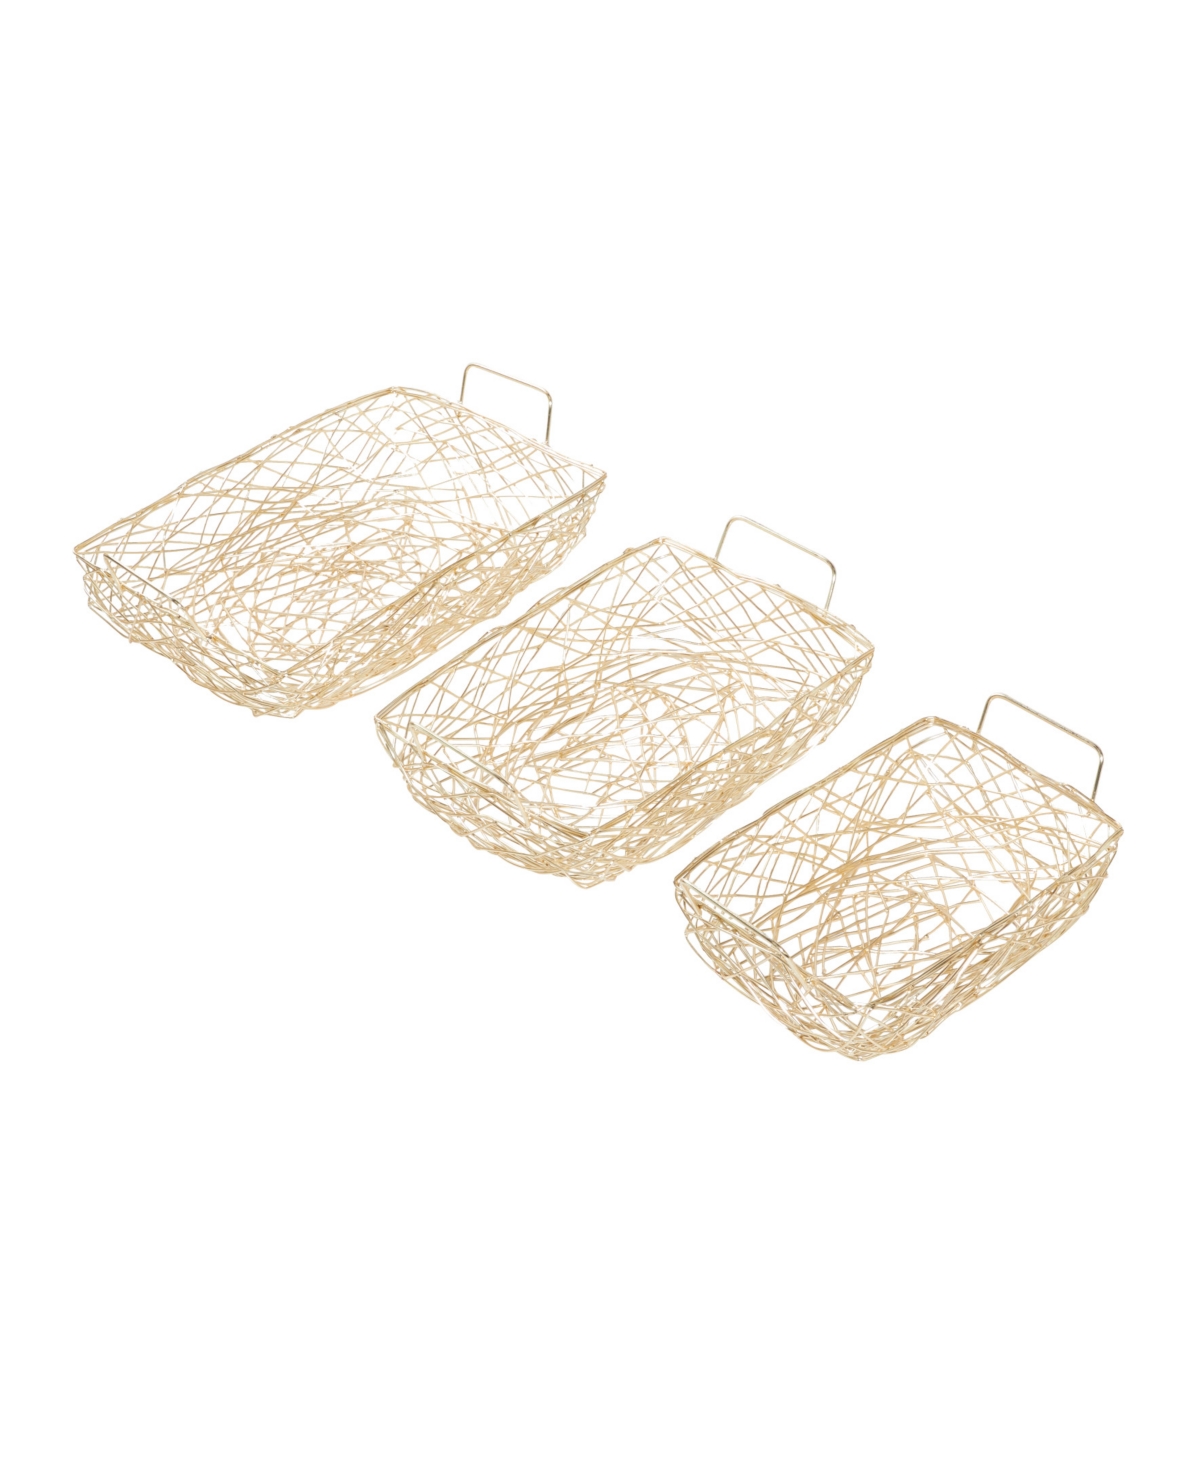 Rosemary Lane Metal Wire Tray, Set Of 3, 15", 16", 18" W In Gold